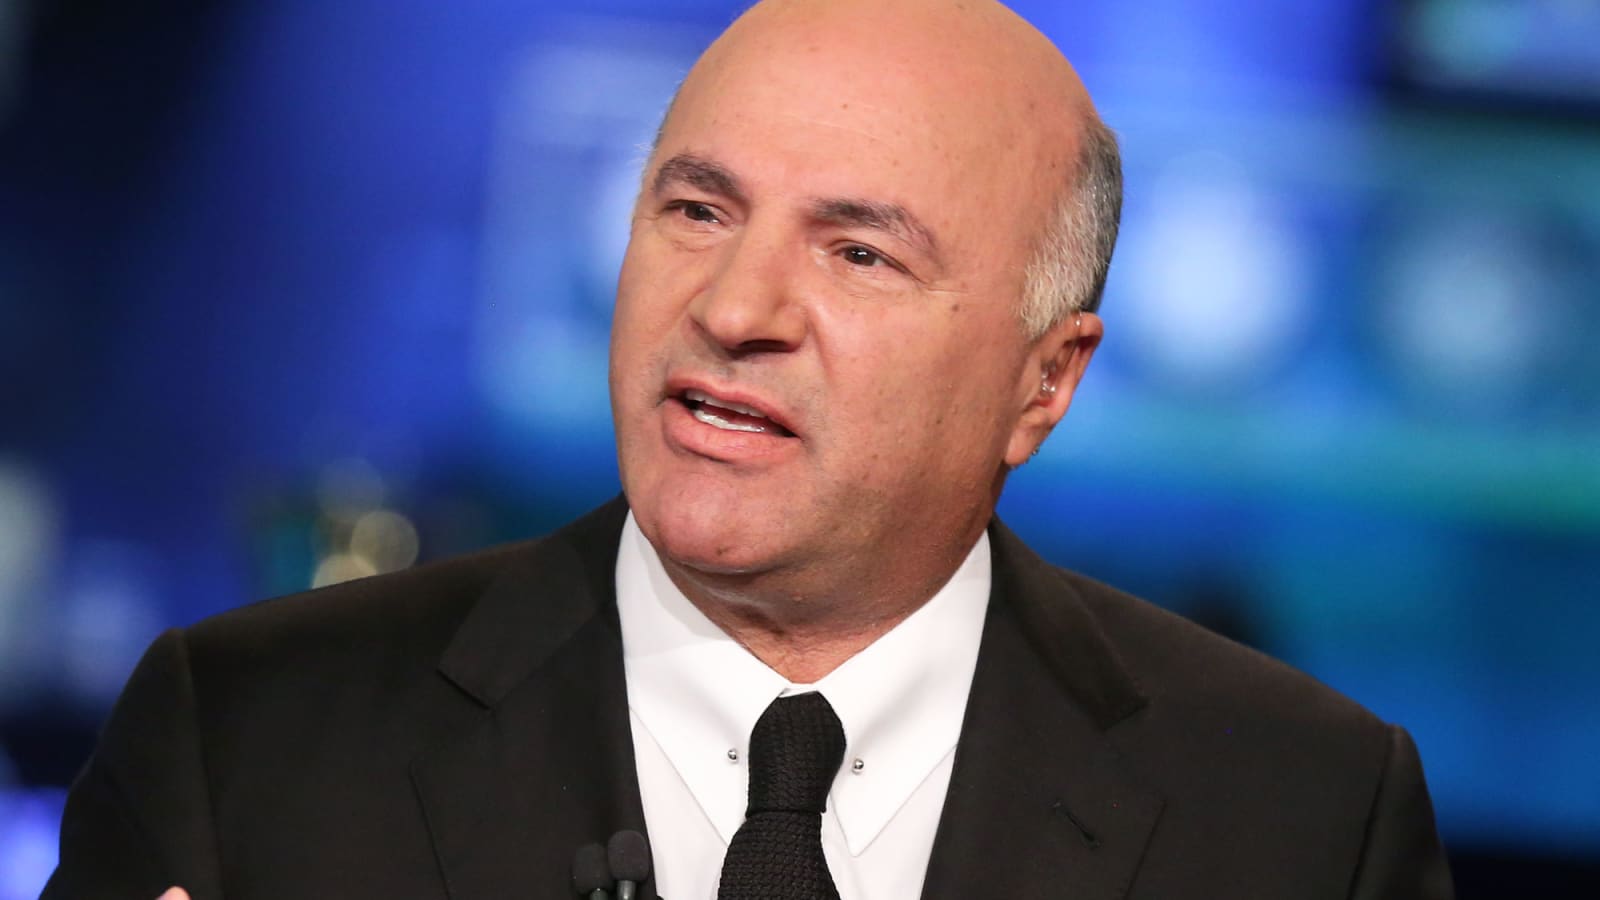 Kevin O'Leary: The No. 1 mistake that can destroy your business